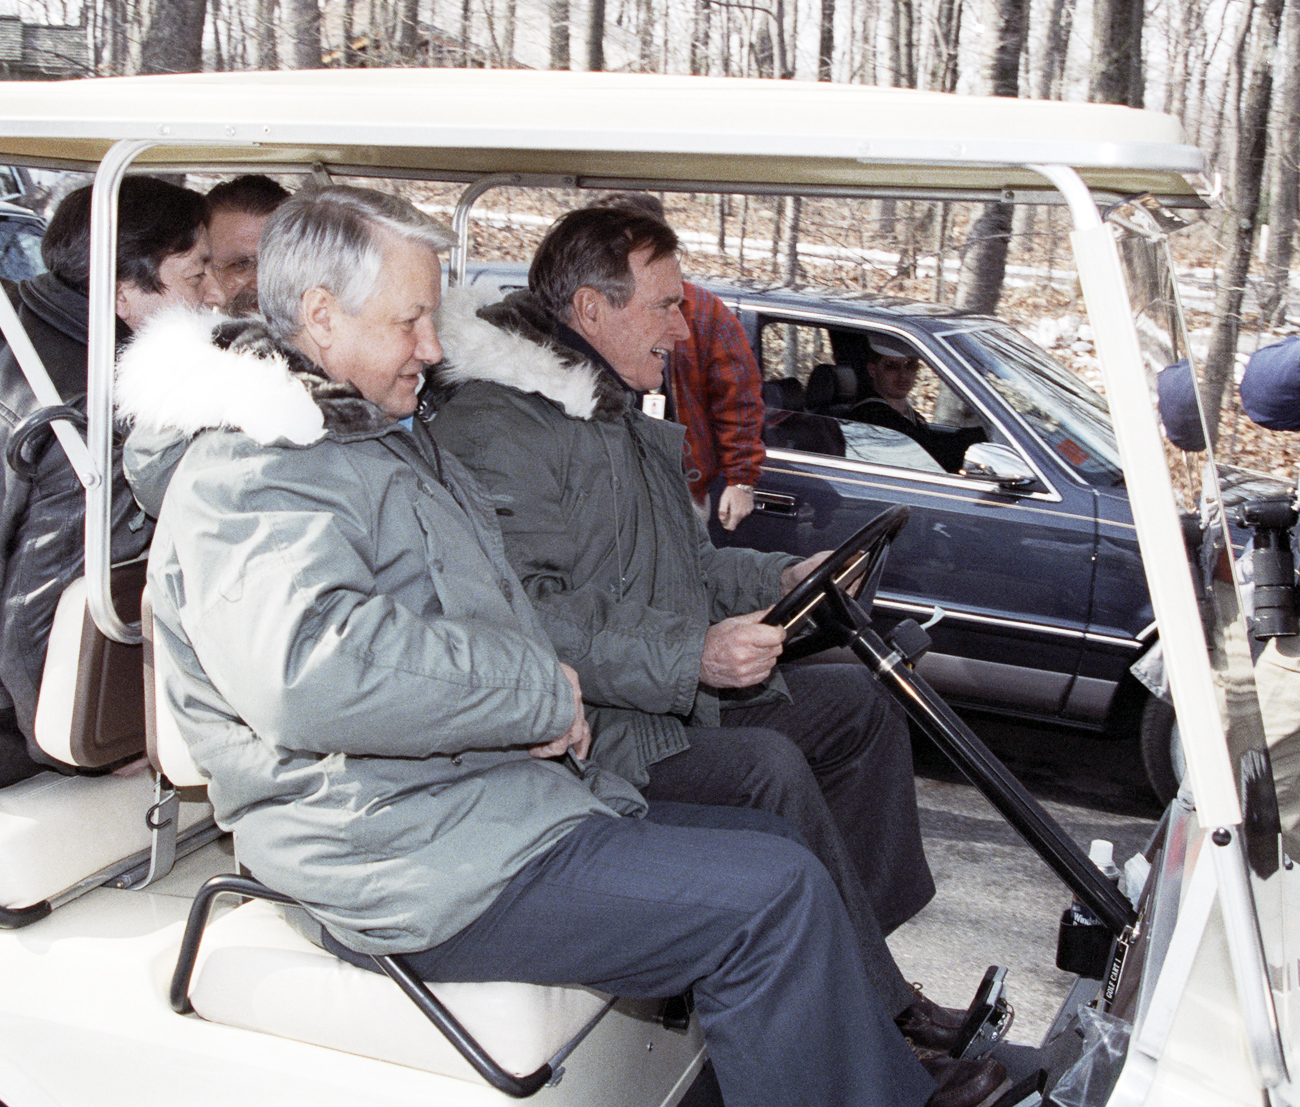 Russian President Boris Yeltsin oversaw the official end of the Cold War on Feb. 1, 1992 at a meeting with George Bush. Photo: Russian President Boris Yeltsin (left) and U.S. President George Bush (right) at Camp David. Source: Dmitry Donskoi/RIA Novosti